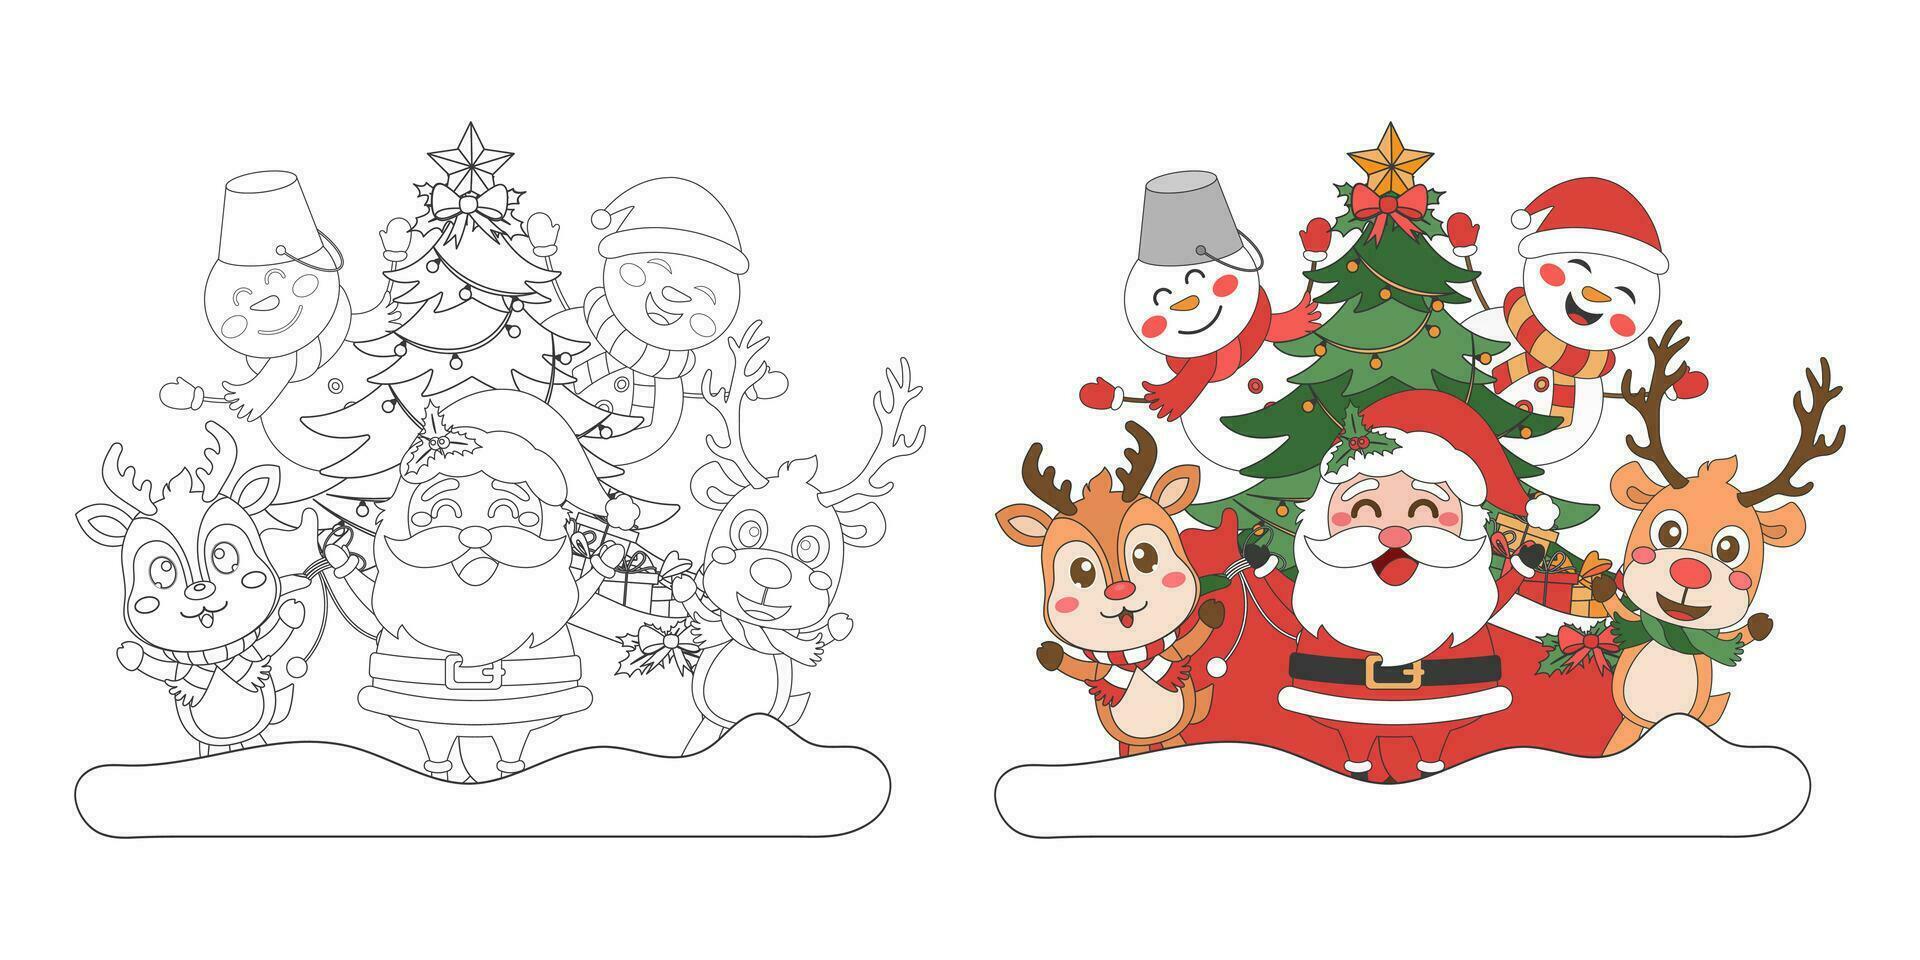 Santa Claus, snowman and reindeer with Christmas tree, Christmas theme line art doodle cartoon illustration, Coloring book for kids, Merry Christmas. vector